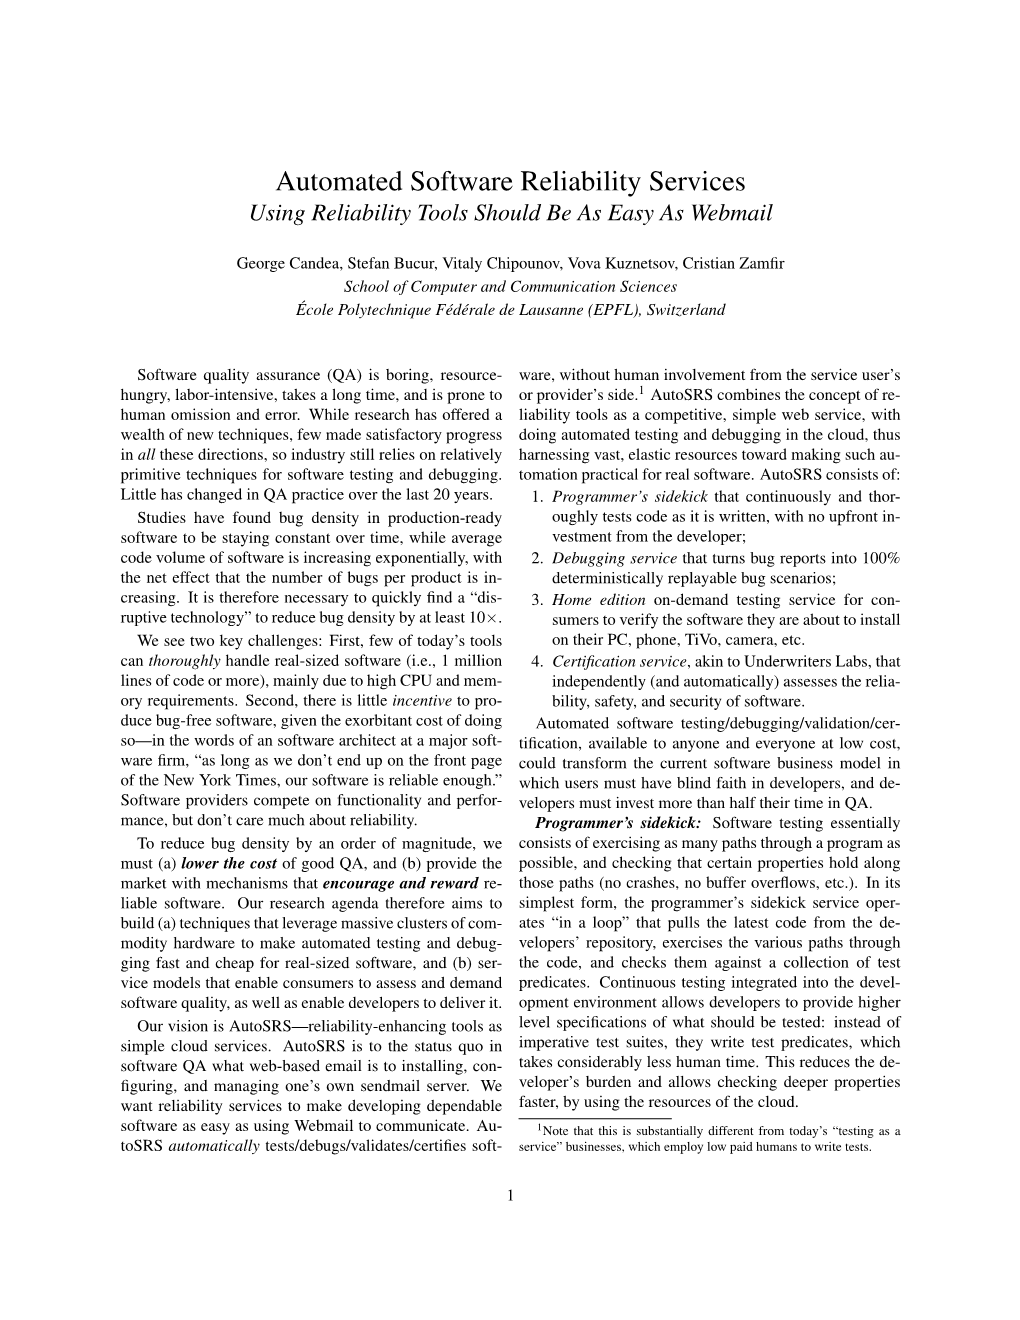 Automated Software Reliability Services Using Reliability Tools Should Be As Easy As Webmail